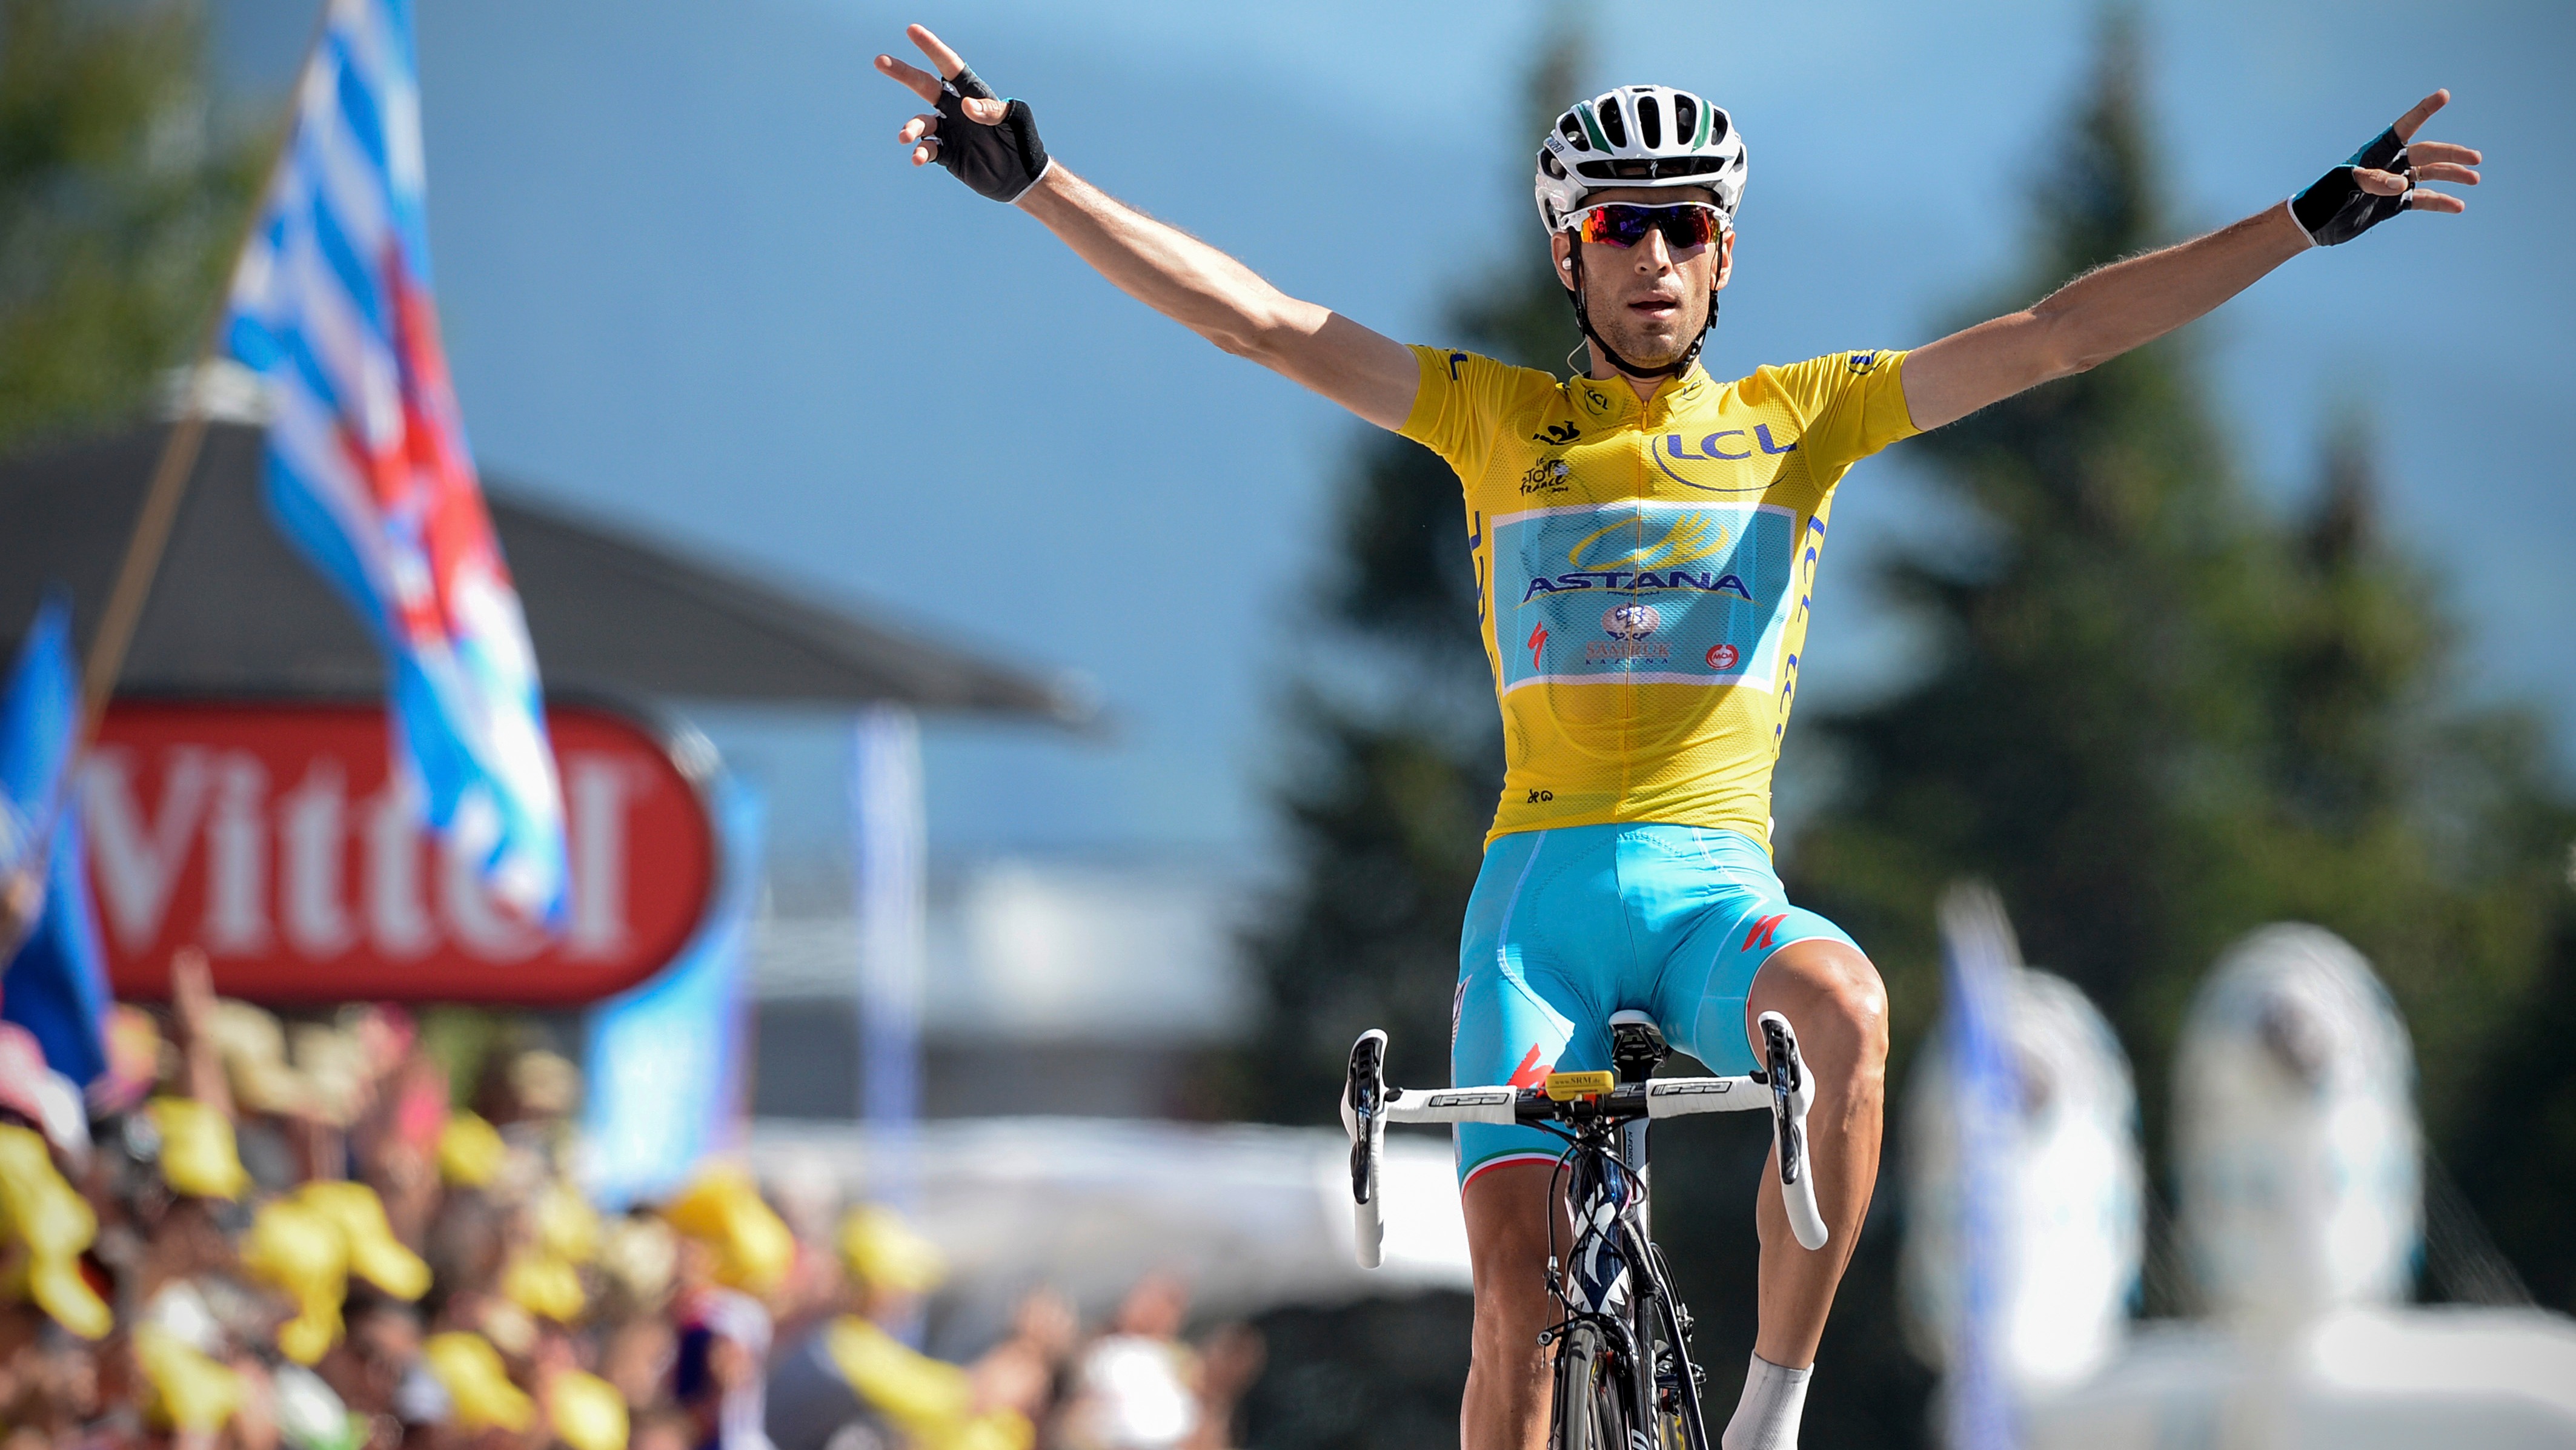 Watch the 2015 Tour de France live on ITV4 ITV News